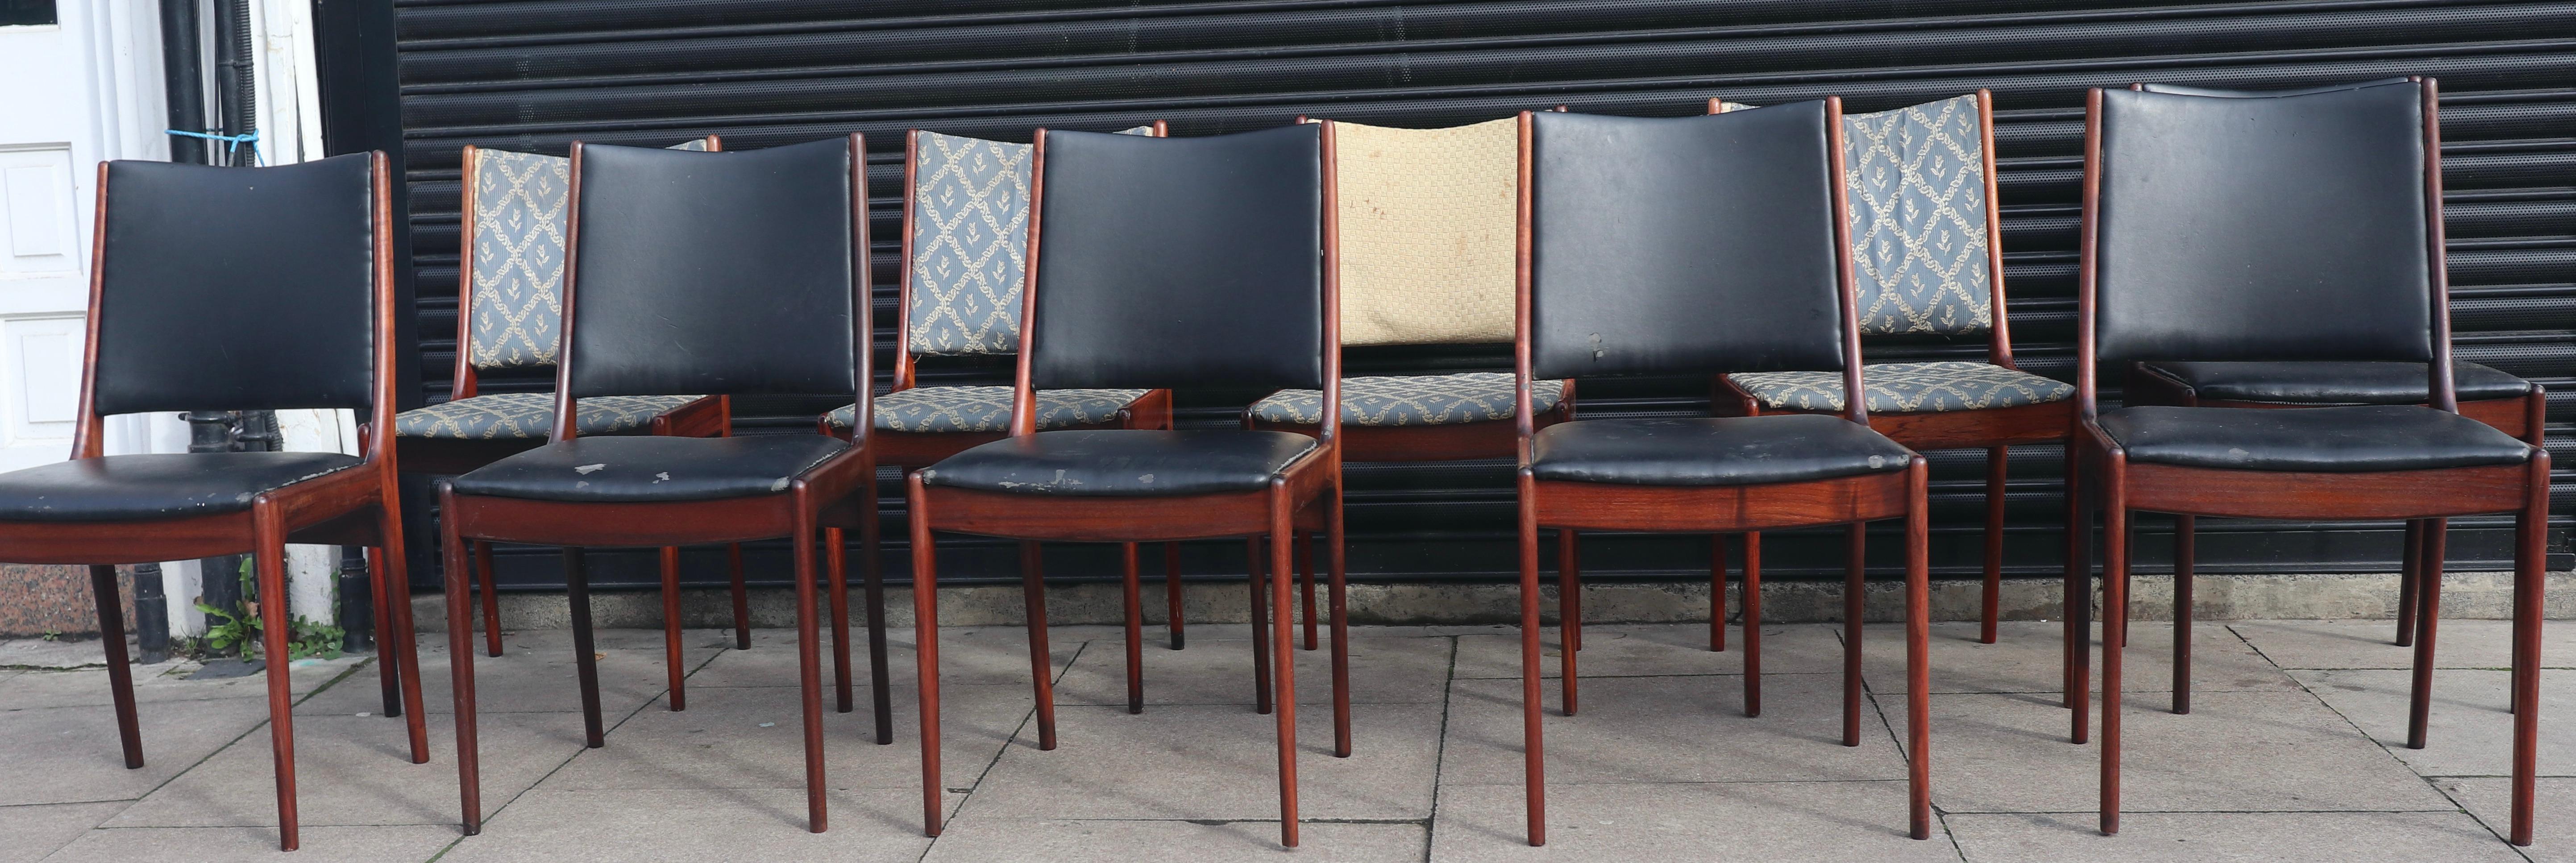 Eight Teak dining Chairs by Johannes Andersen for Uldum Møbelfabrik 1960s In Good Condition For Sale In London, GB